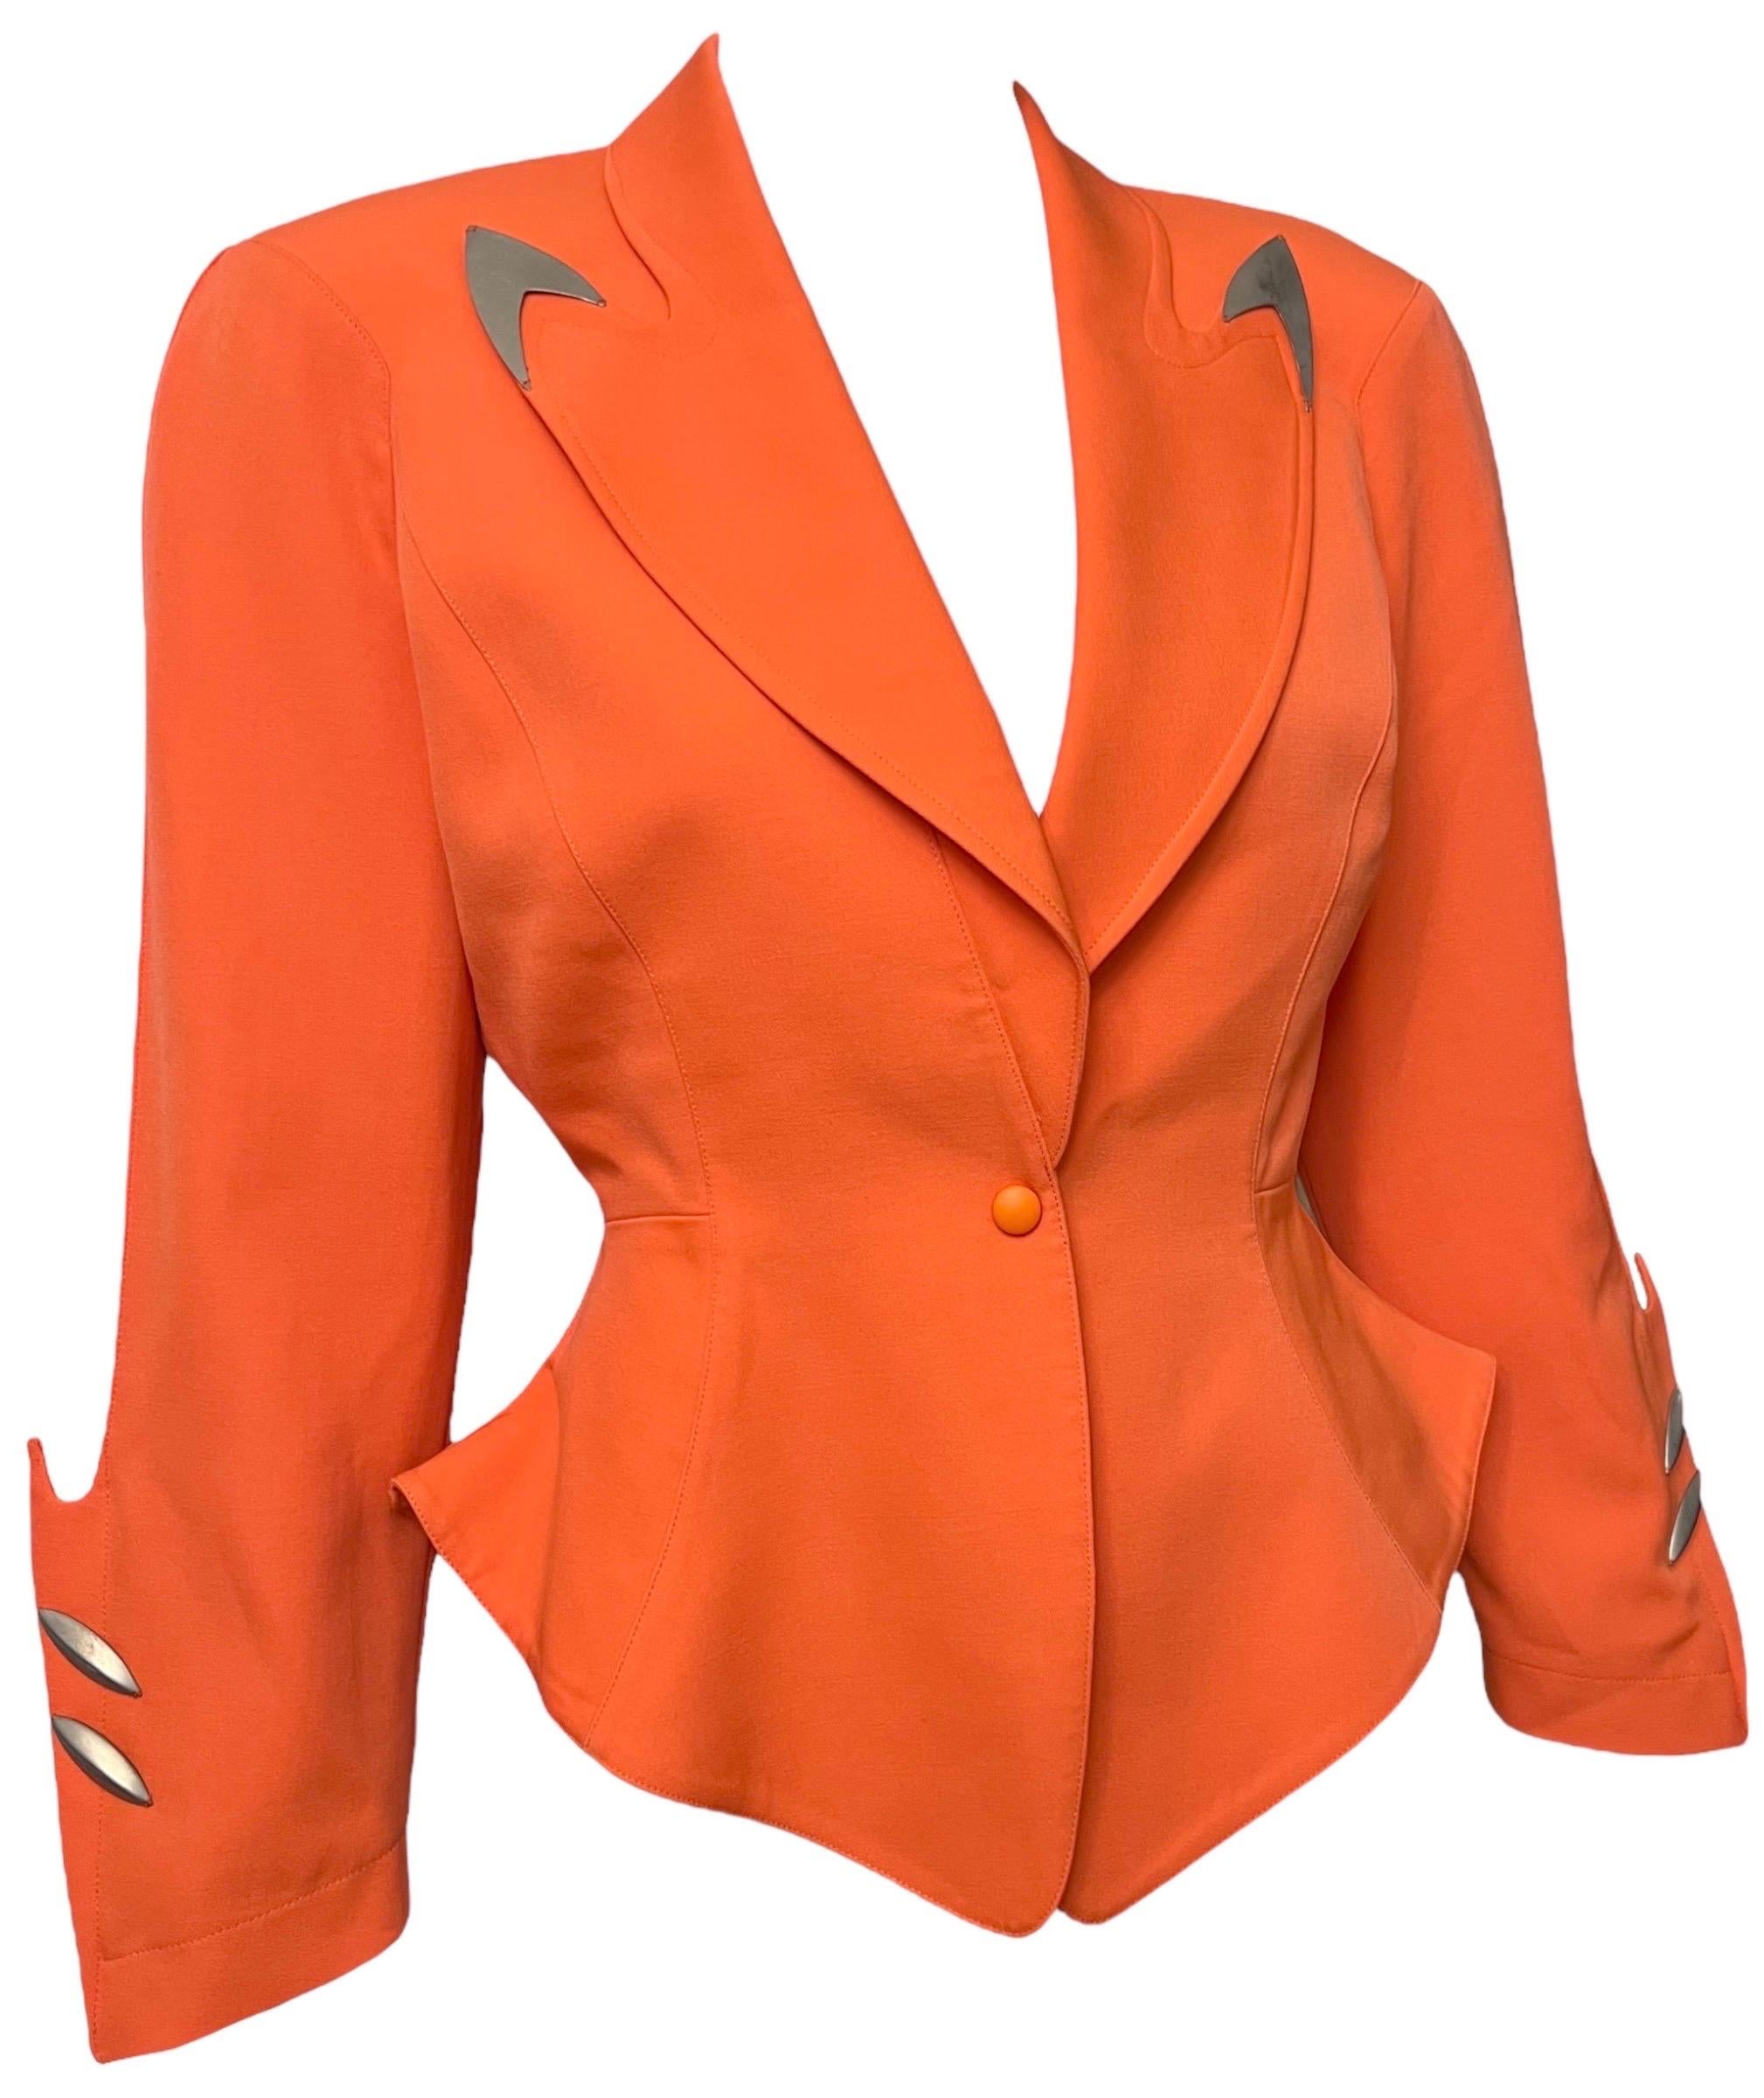 Thierry Mugler futuristic vivid orange jacket from the Fall Winter 1989 Hiver Buick collection.
Structured shoulders, peplum flared waist, single snap button closure, and long sleeves.
The lapel tips are accented with metal plates and the cuffs have